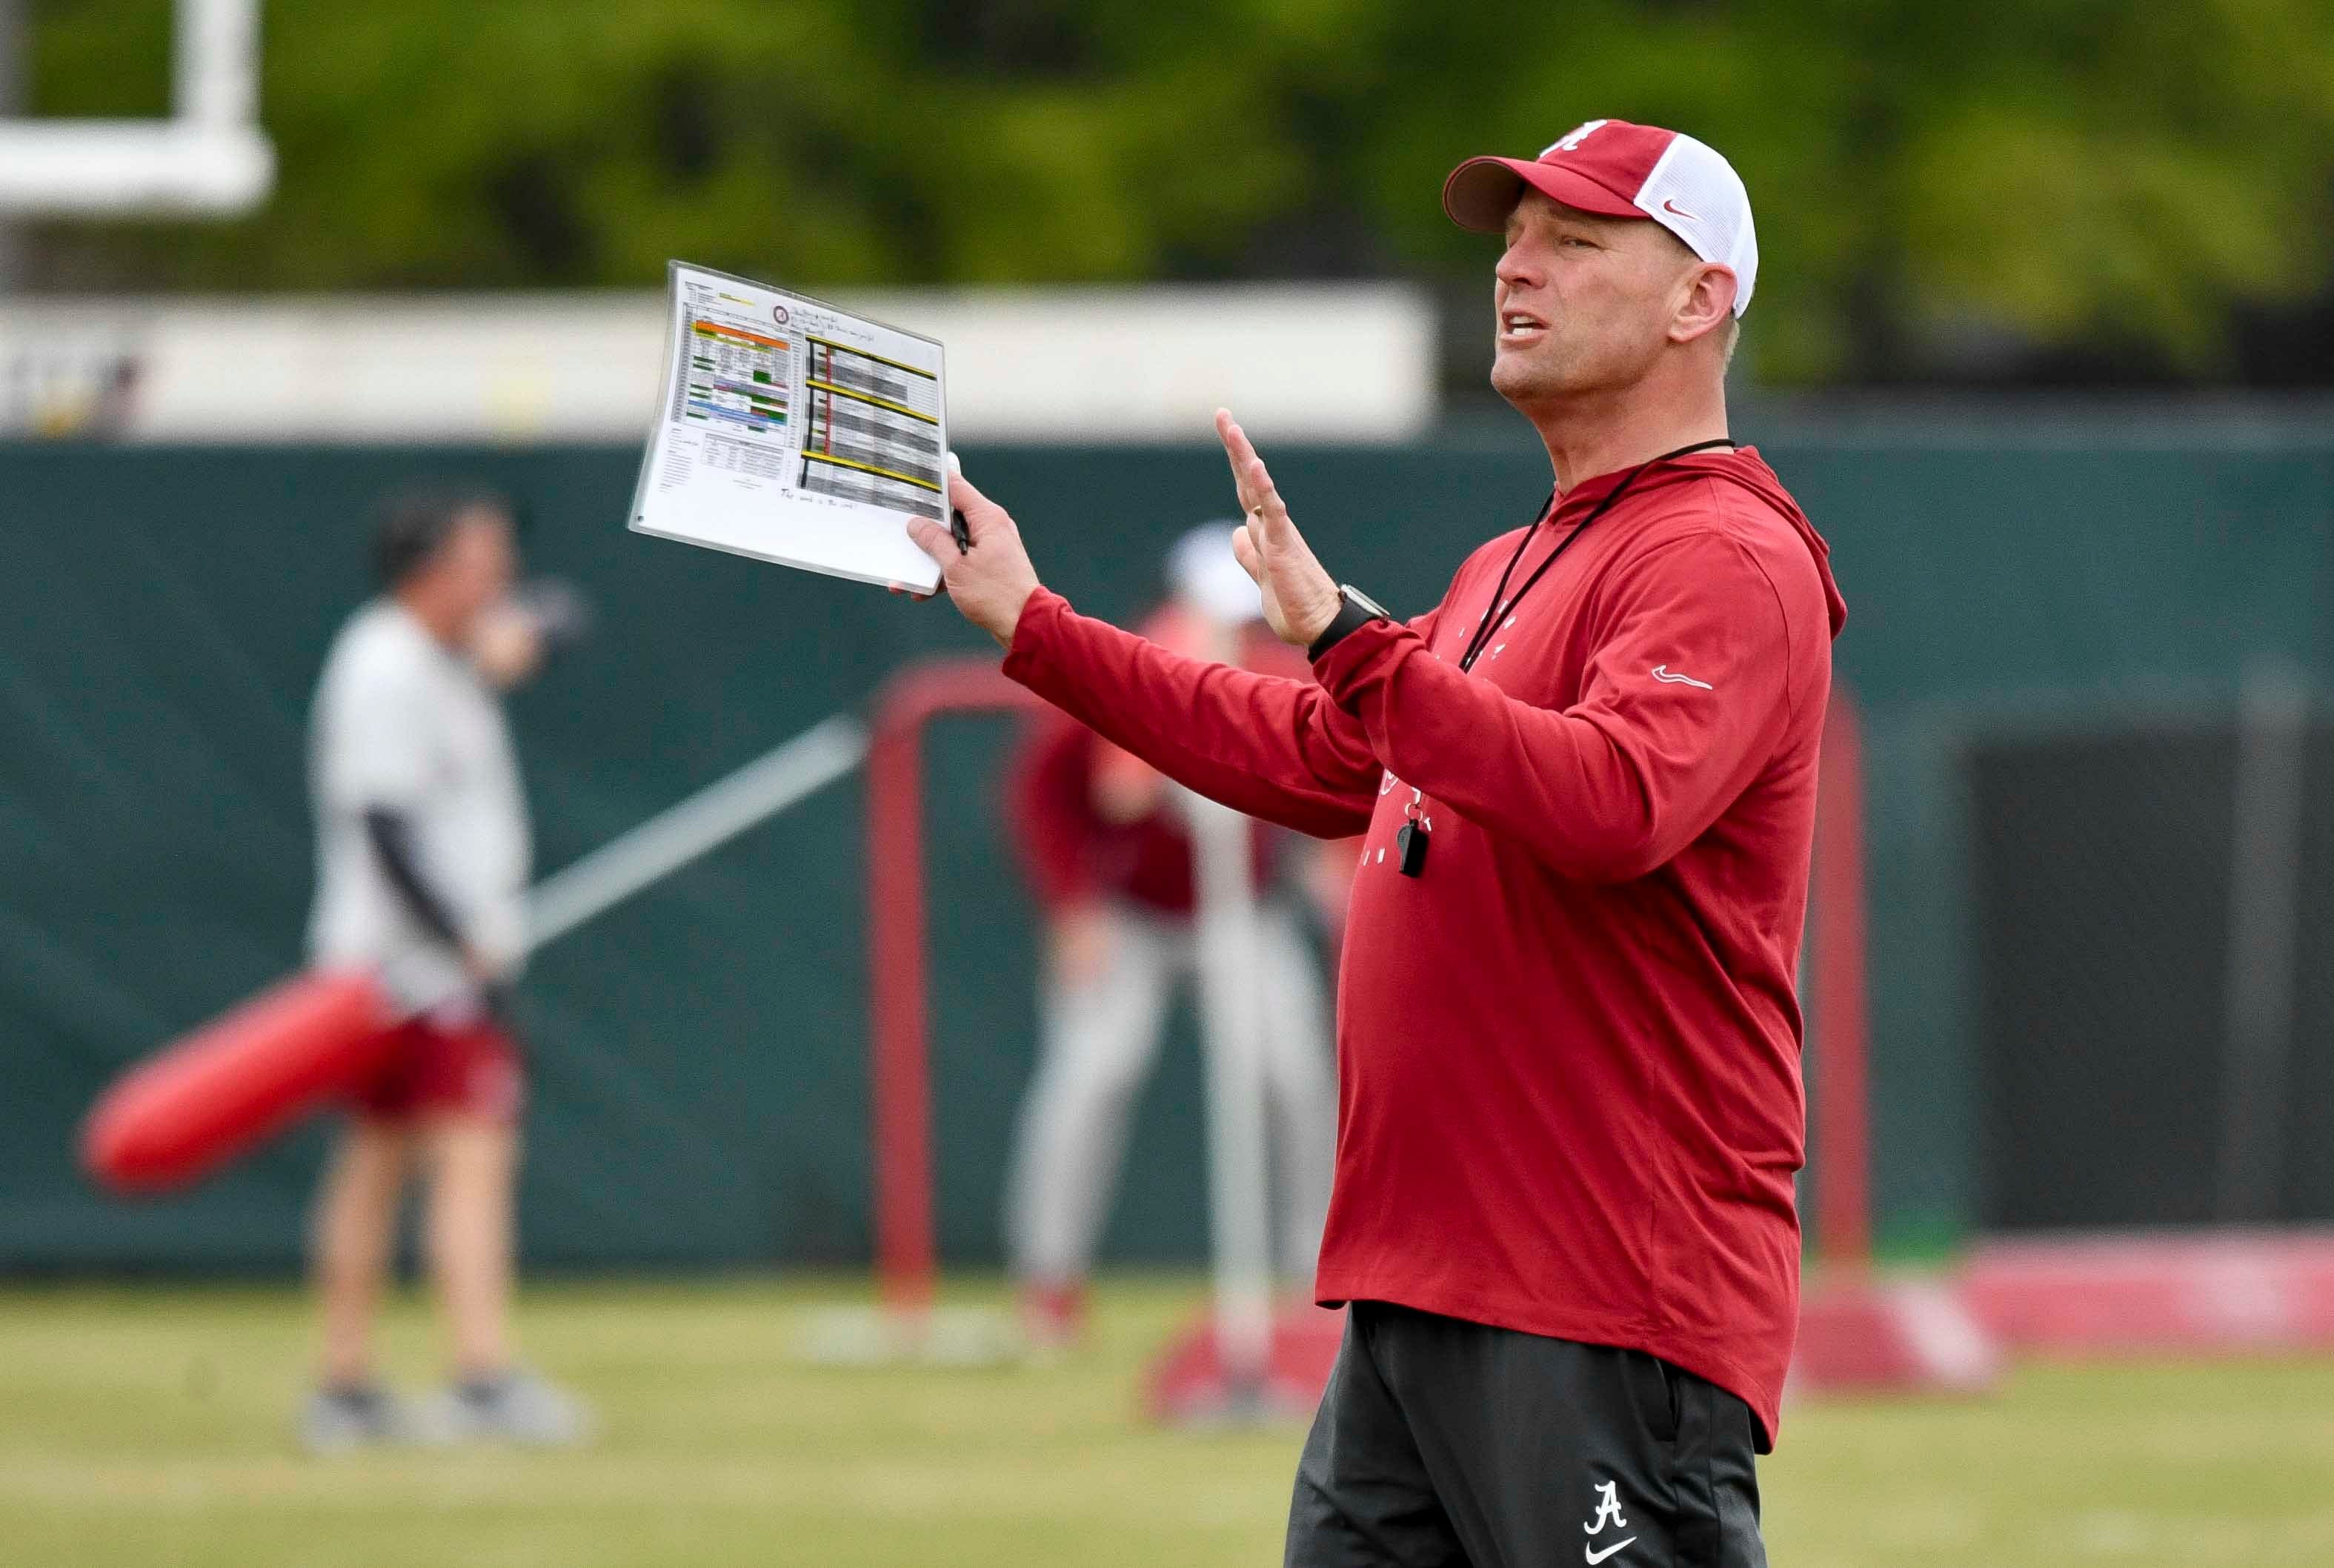 Could Alabama coach Kalen DeBoer be one of the most overrated college football coaches? DeBoer was great at Washington but faces a tall task in following an Alabama legend.